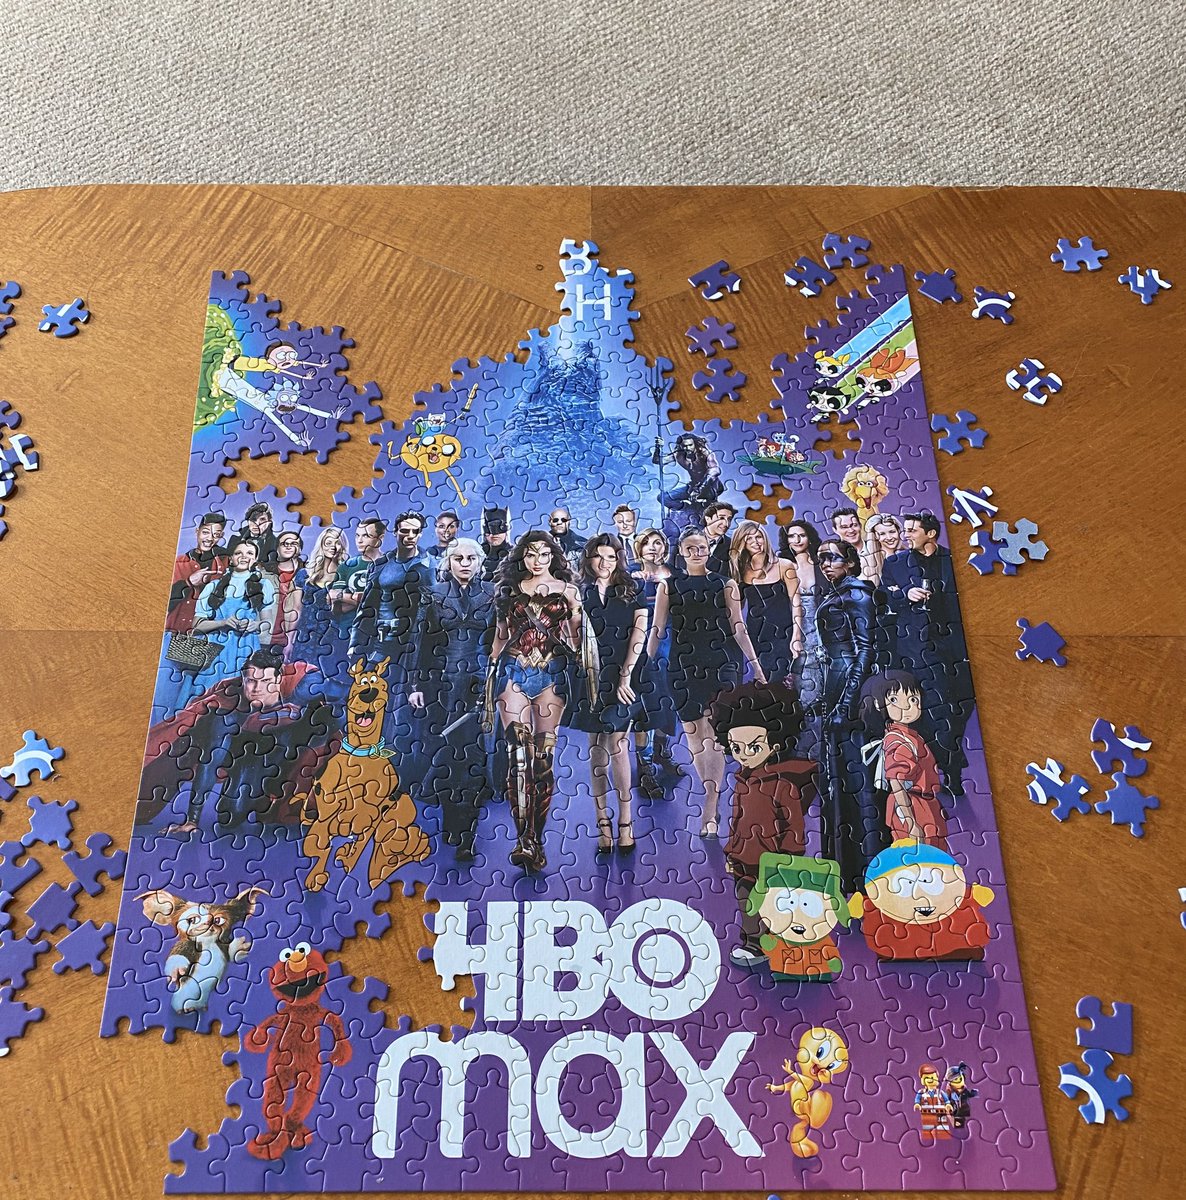 Dorian Parks on Twitter: "Working on this #HBOMax puzzle. Should finish  today. https://t.co/mO86J2hqU2" / Twitter